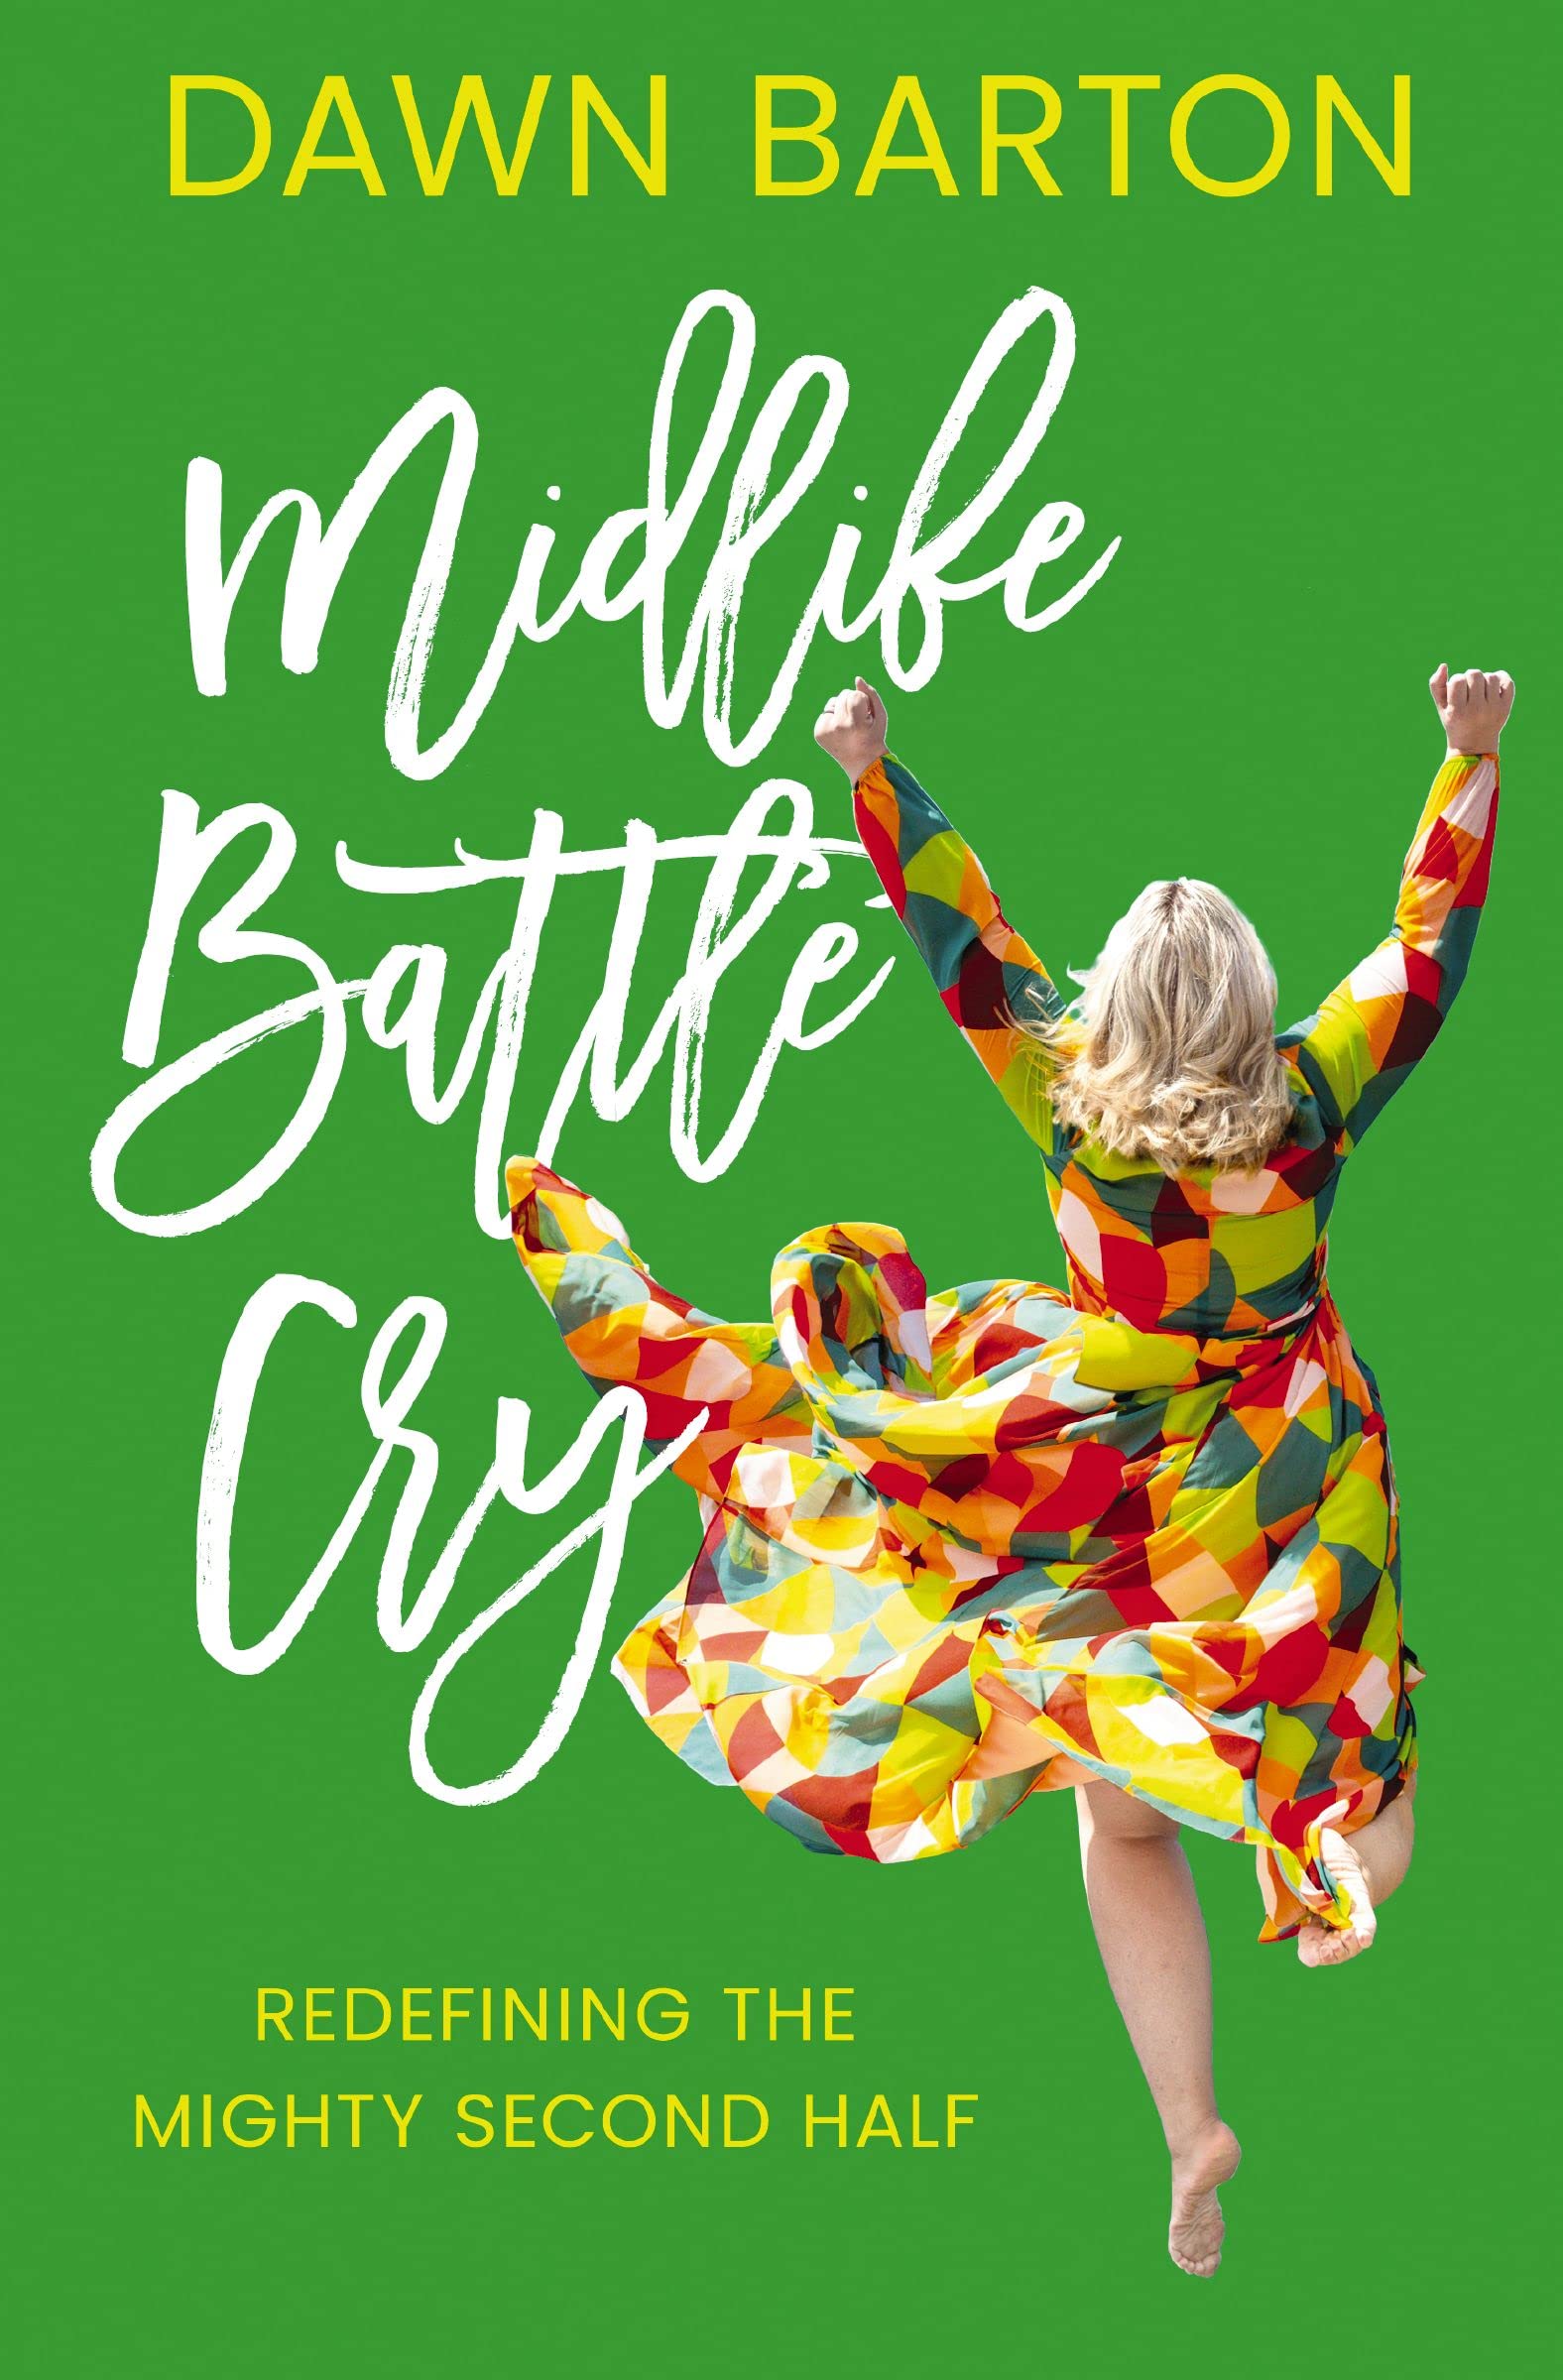 Midlife Battle Cry: Redefining the Mighty Second Half by Dawn Barton